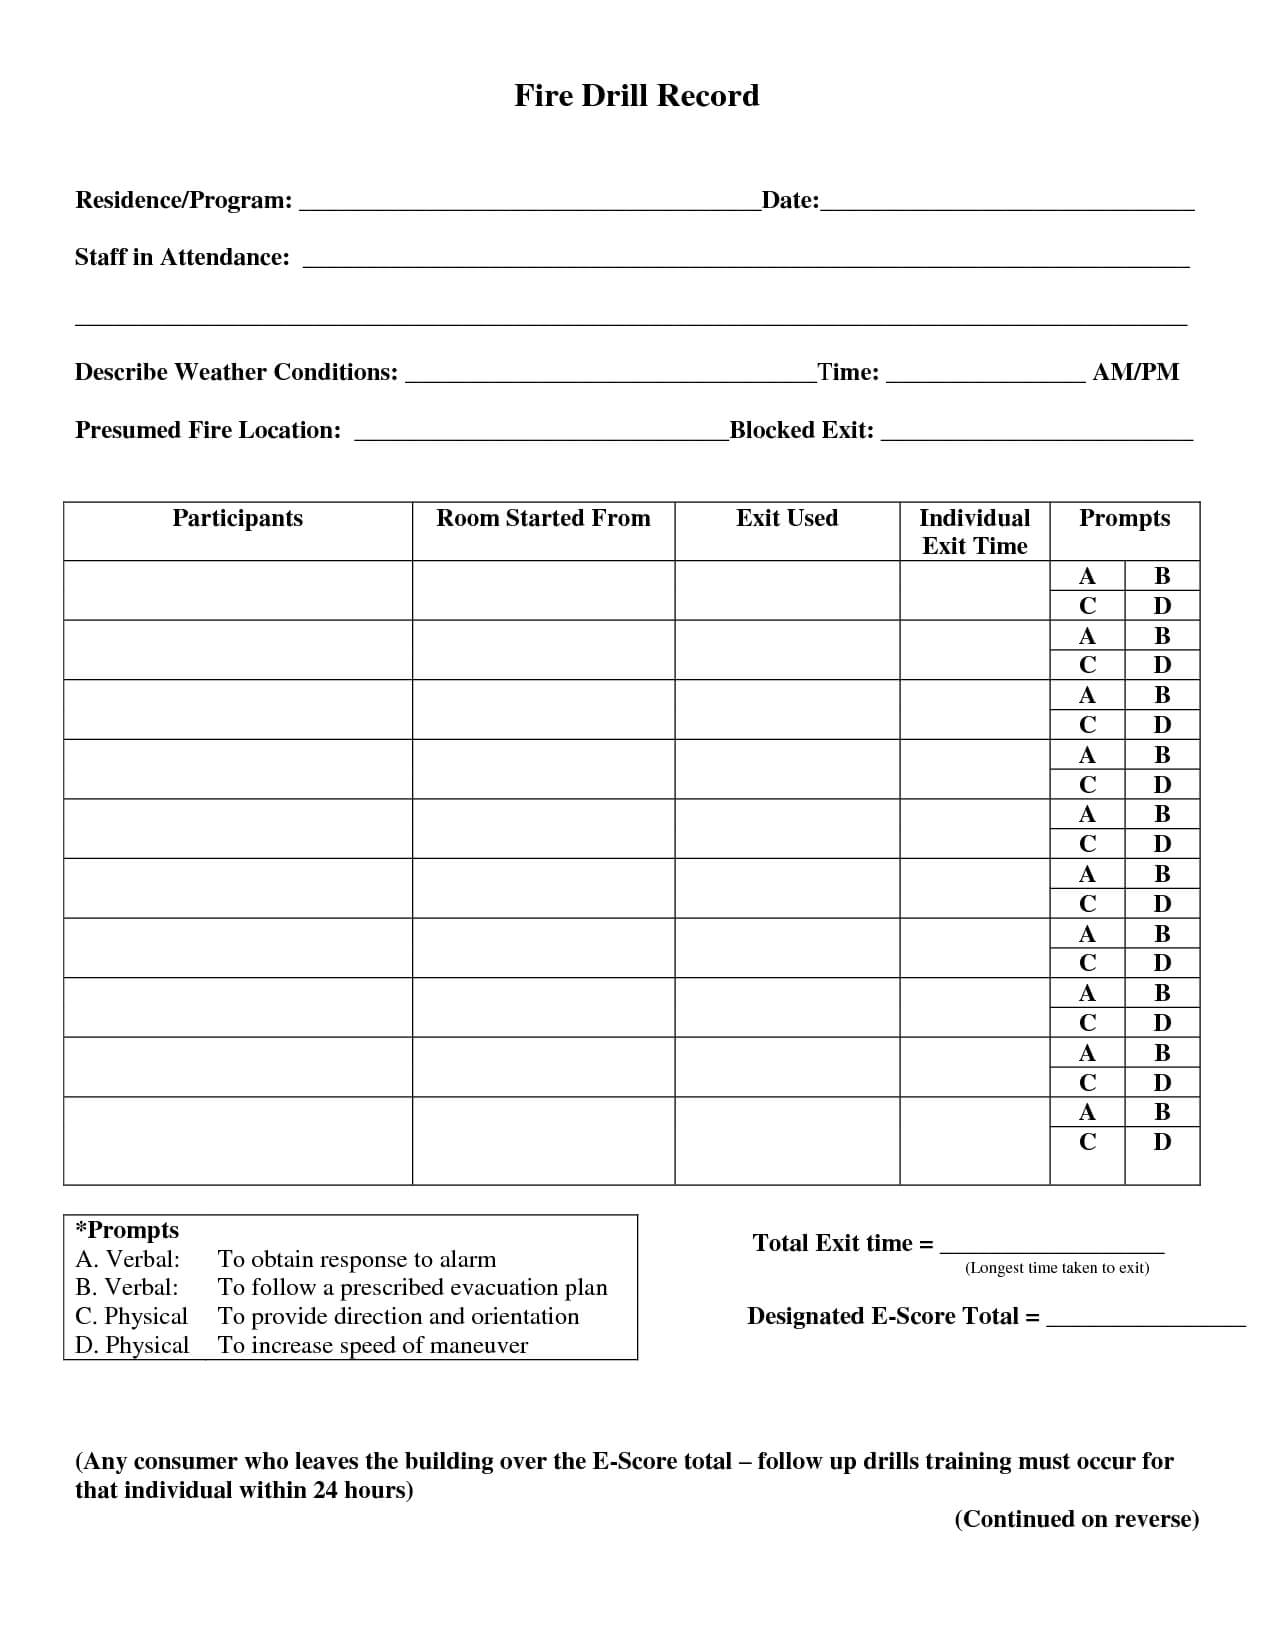 22 Images Of Osha Fire Drill Safety Template | Jackmonster Pertaining To Fire Evacuation Drill Report Template